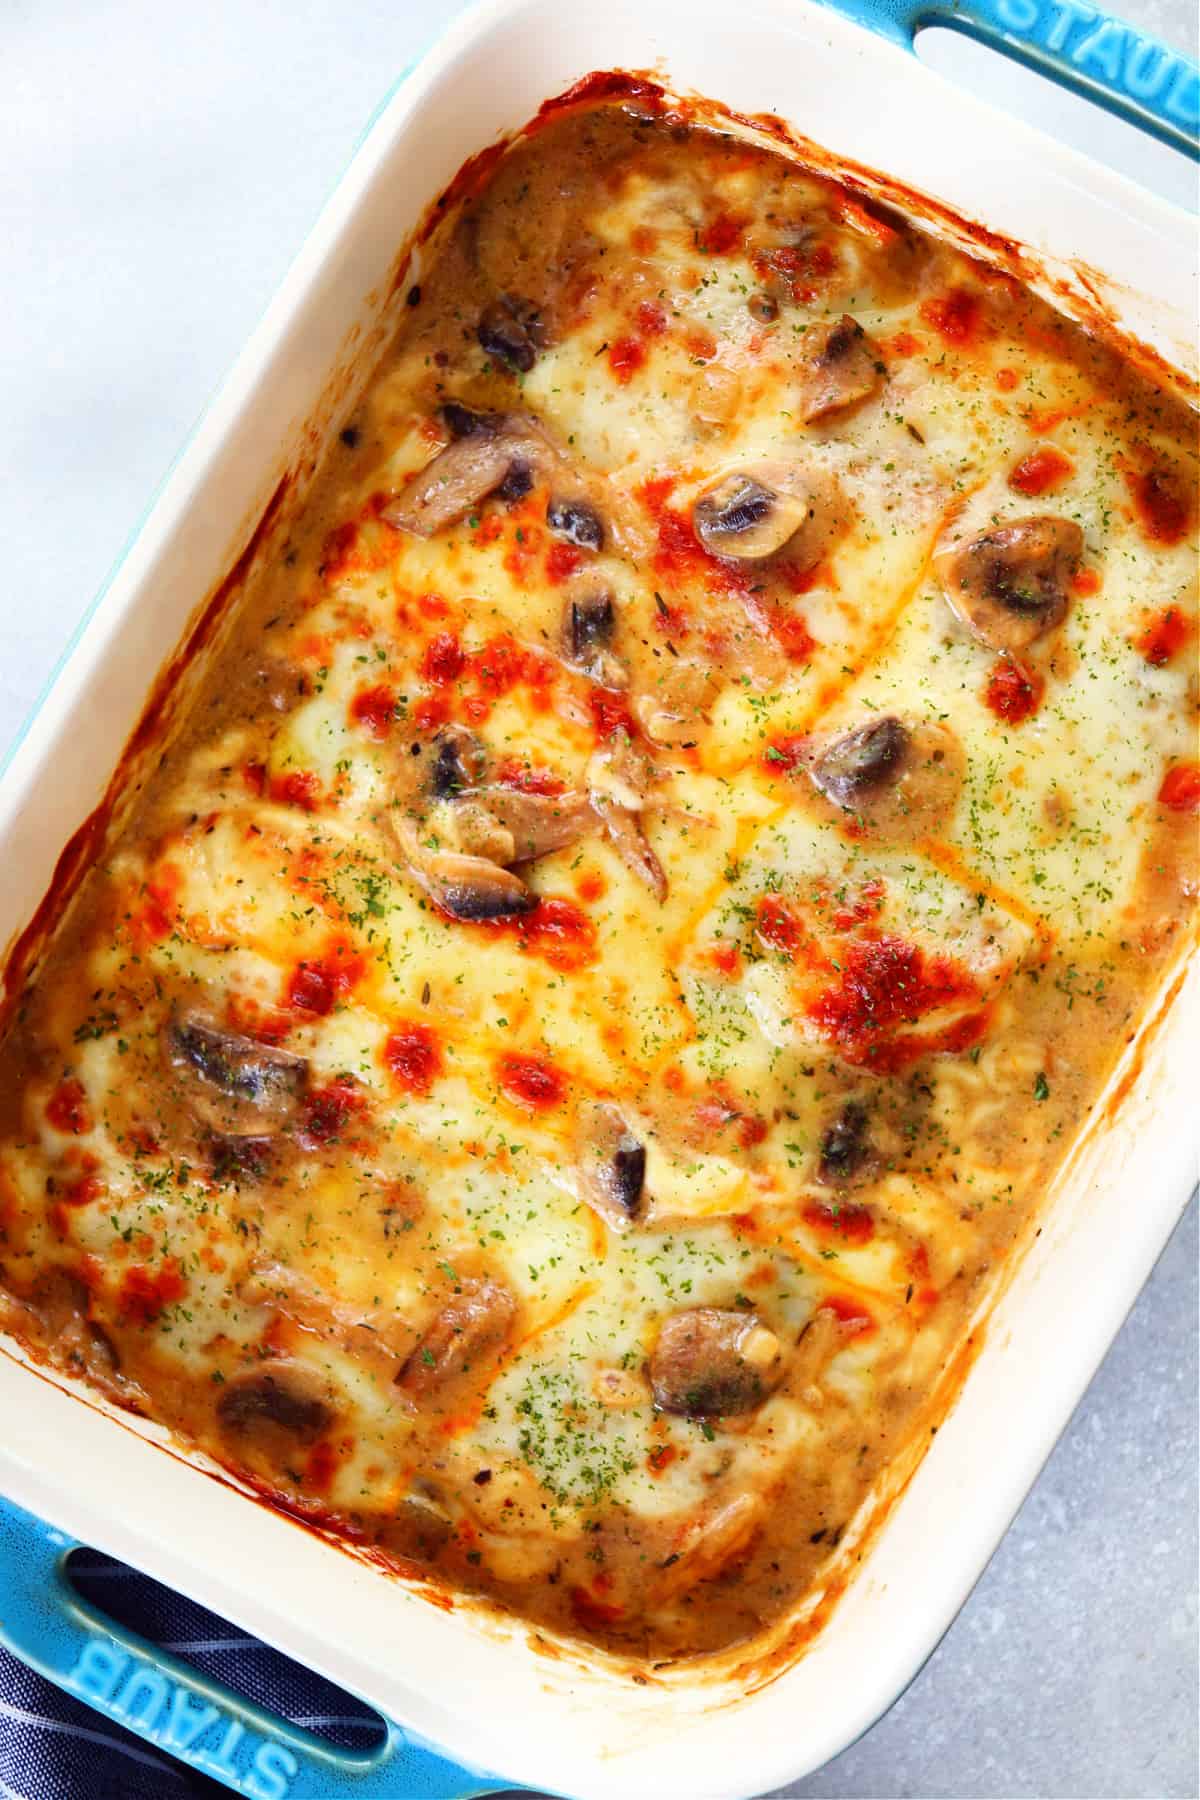 Chicken casserole with mushroom sauce and melted cheese in a blue Staub baking dish.